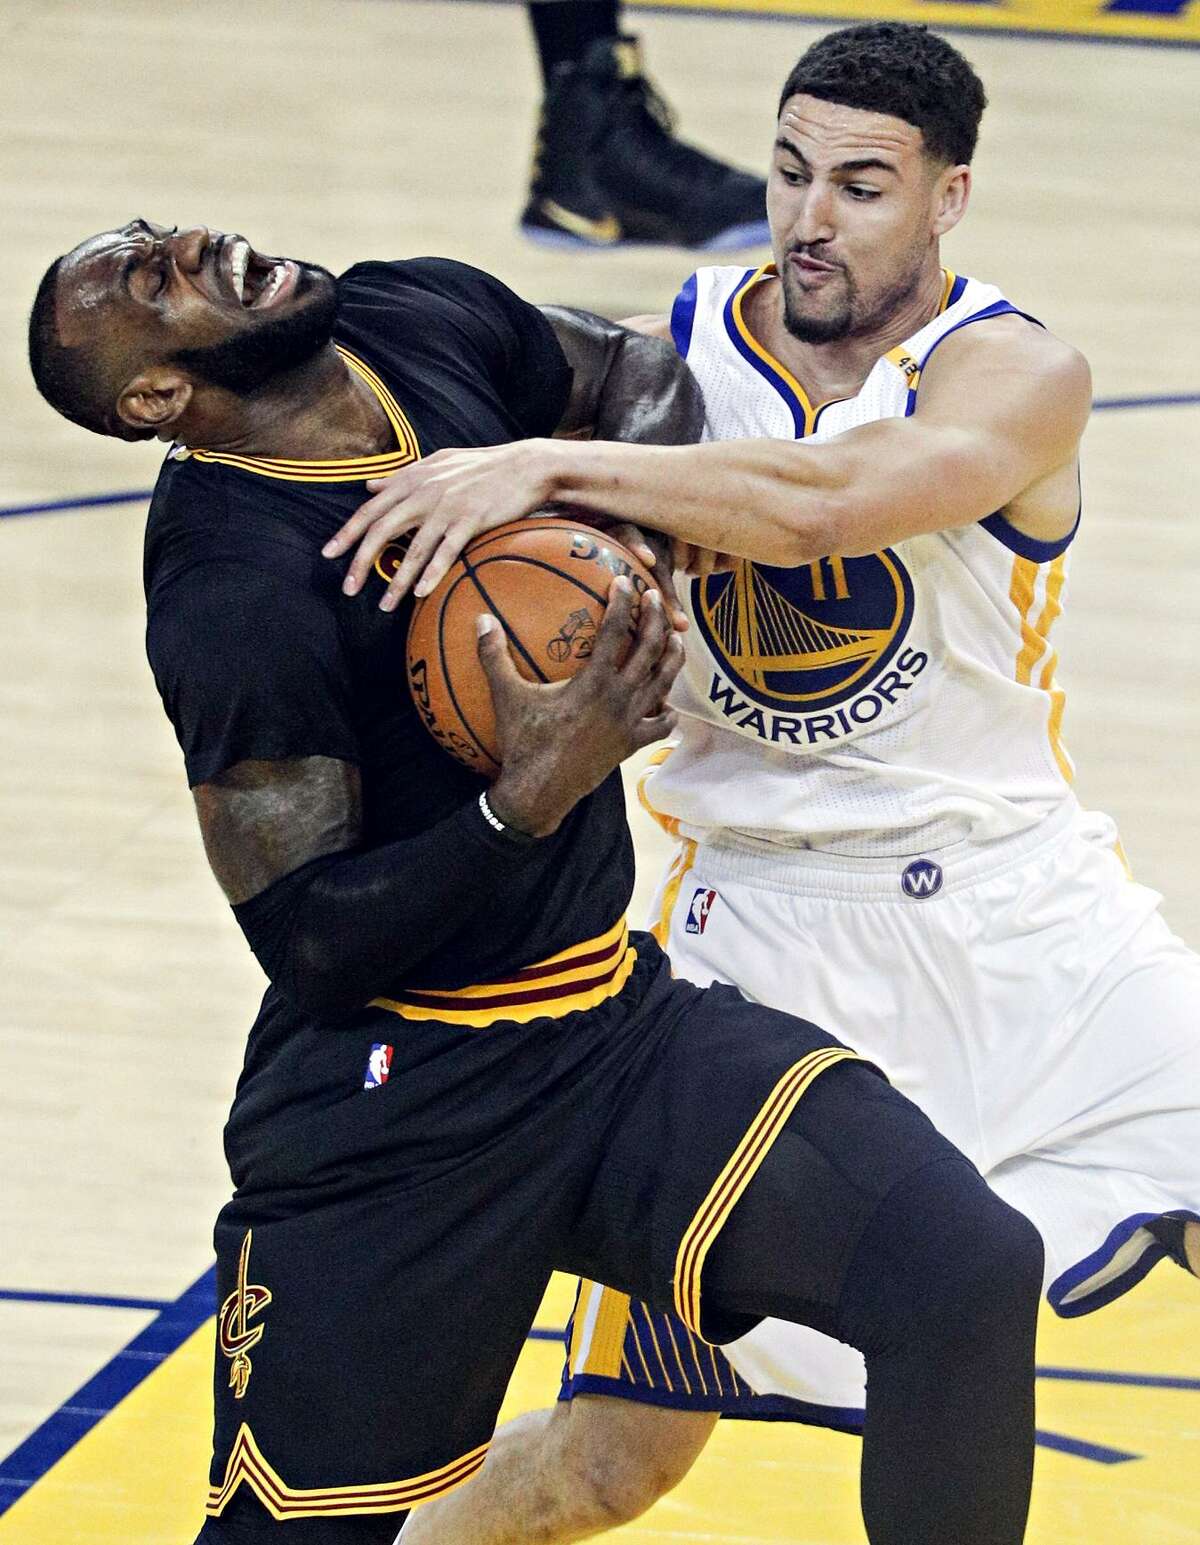 Warriors guard Klay Thompson hounds the Cavaliers’ LeBron James in the first quarter of Game 2 of the NBA Finals. James scored 29 points, but Thompson countered with 22.